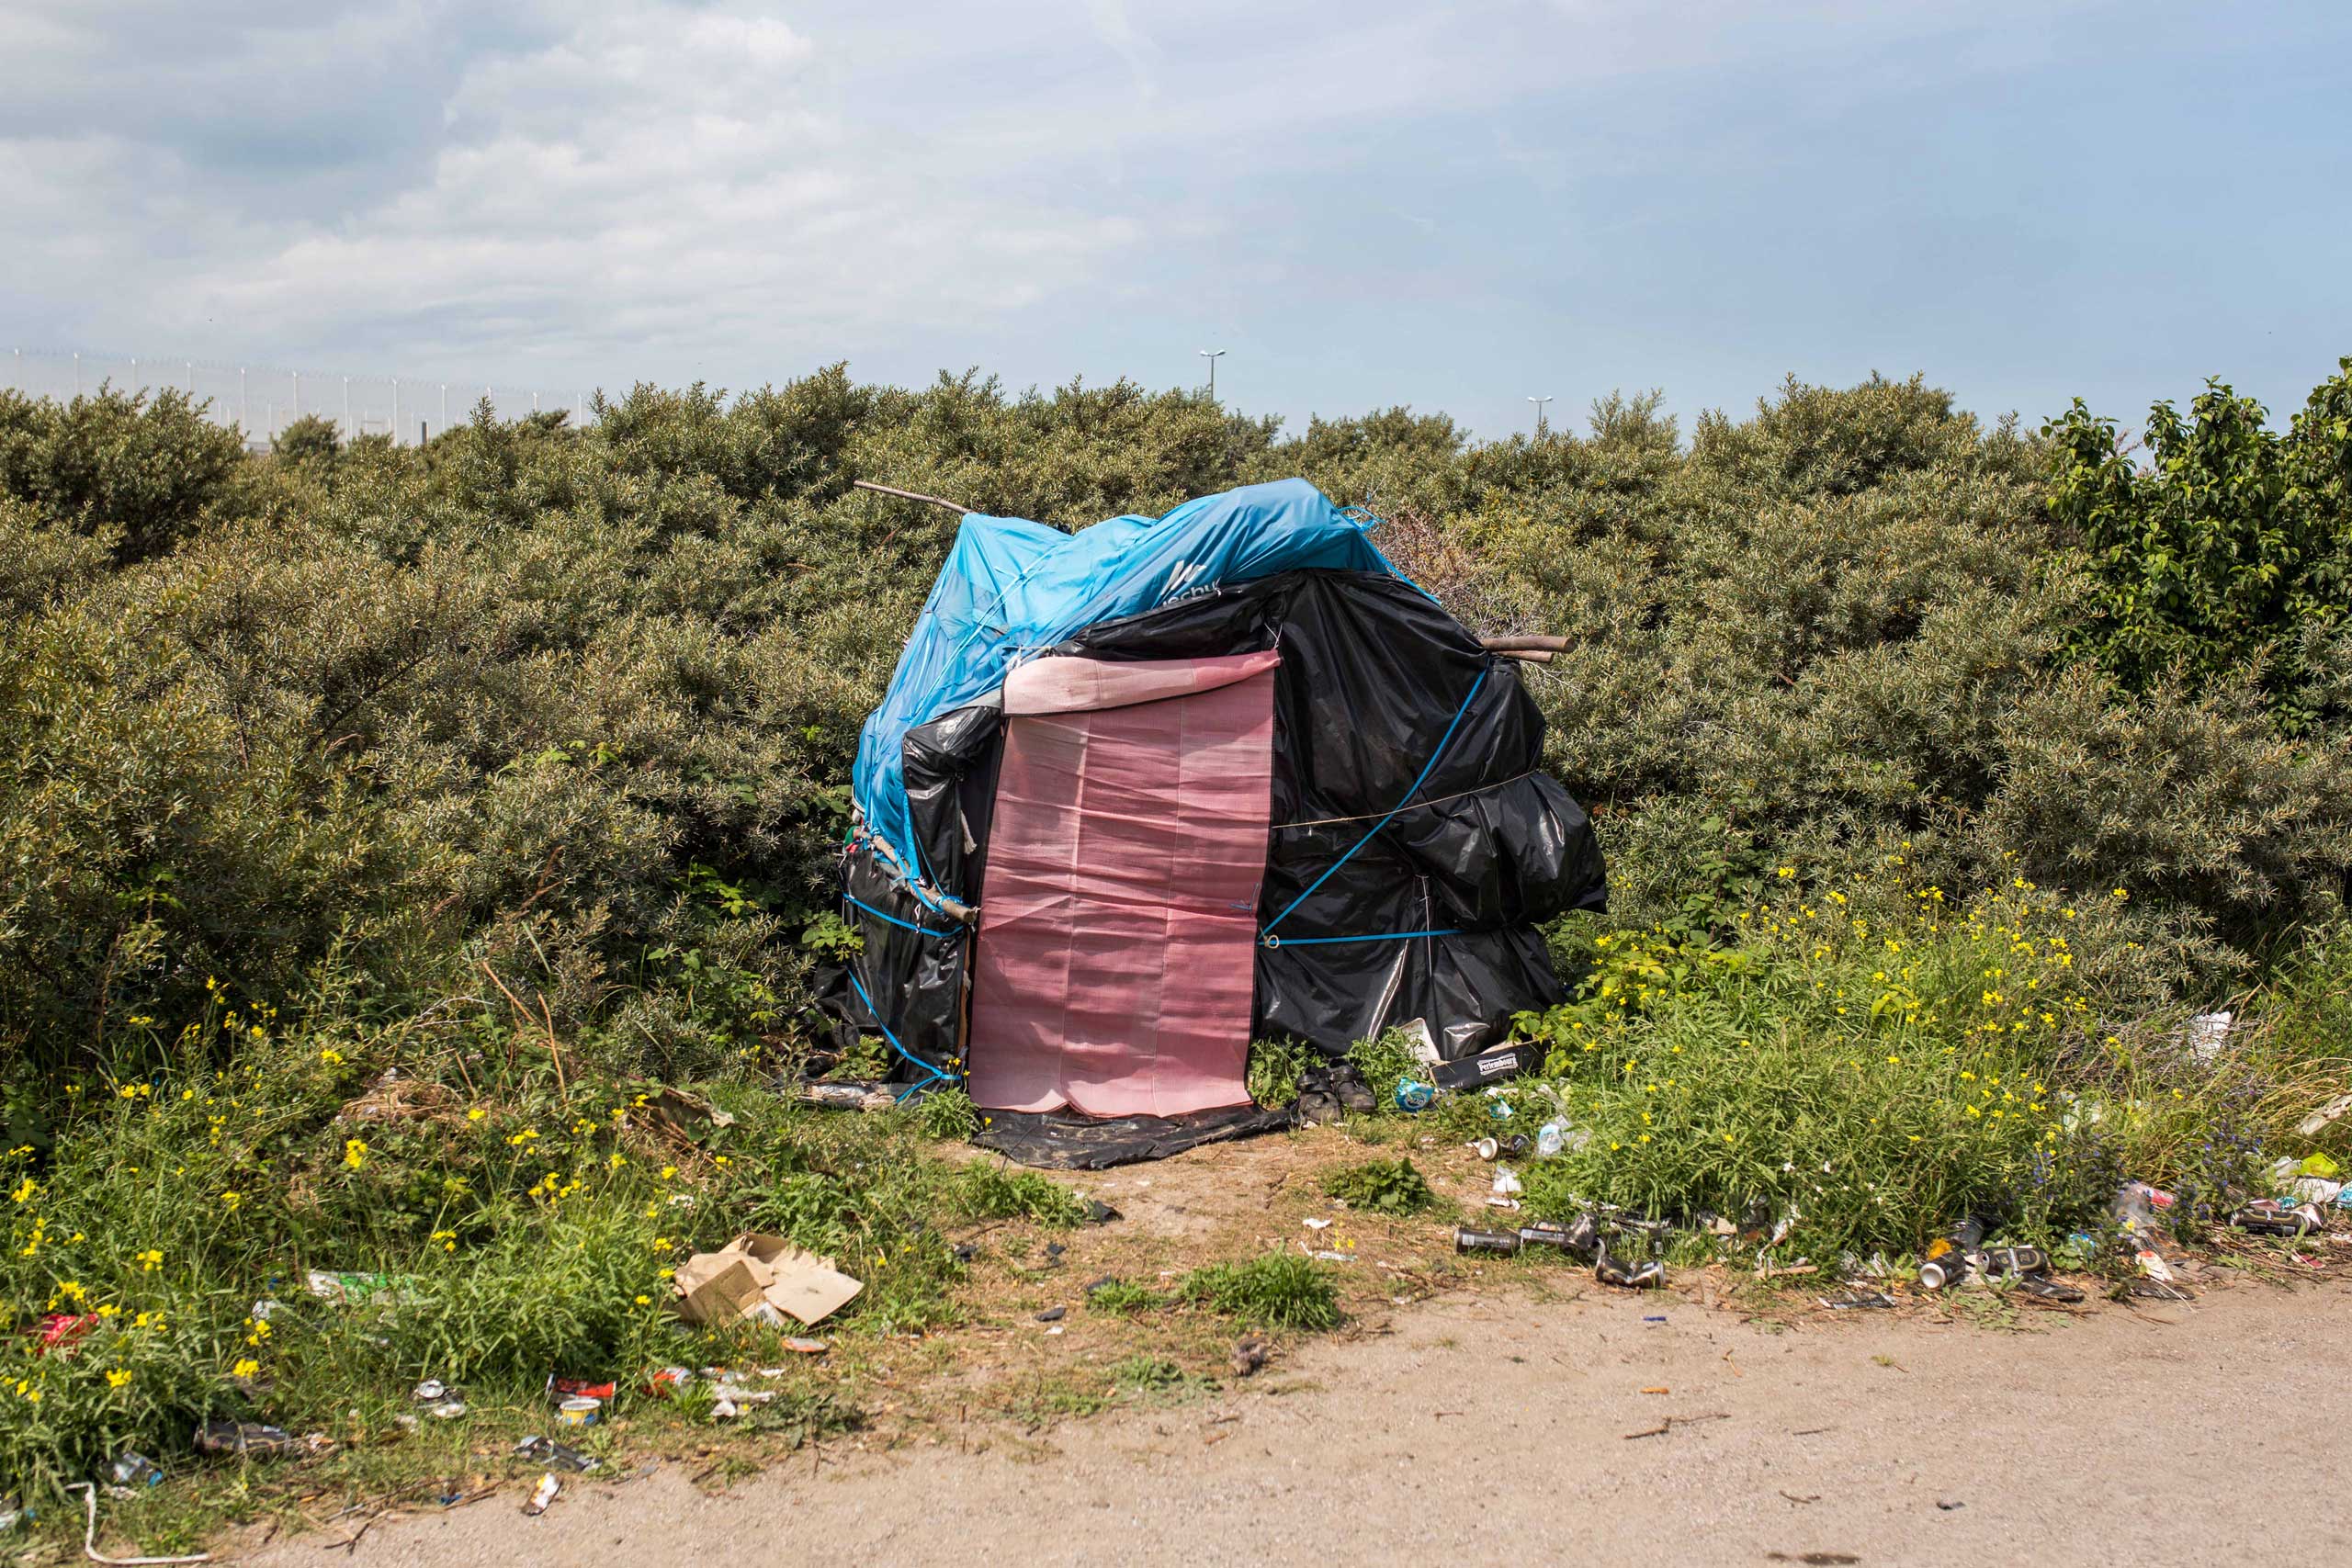 A tent at a make shift camp near the port of Calais in Calais, France, on July 31, 2015. (Rob Stothard—Getty Images)